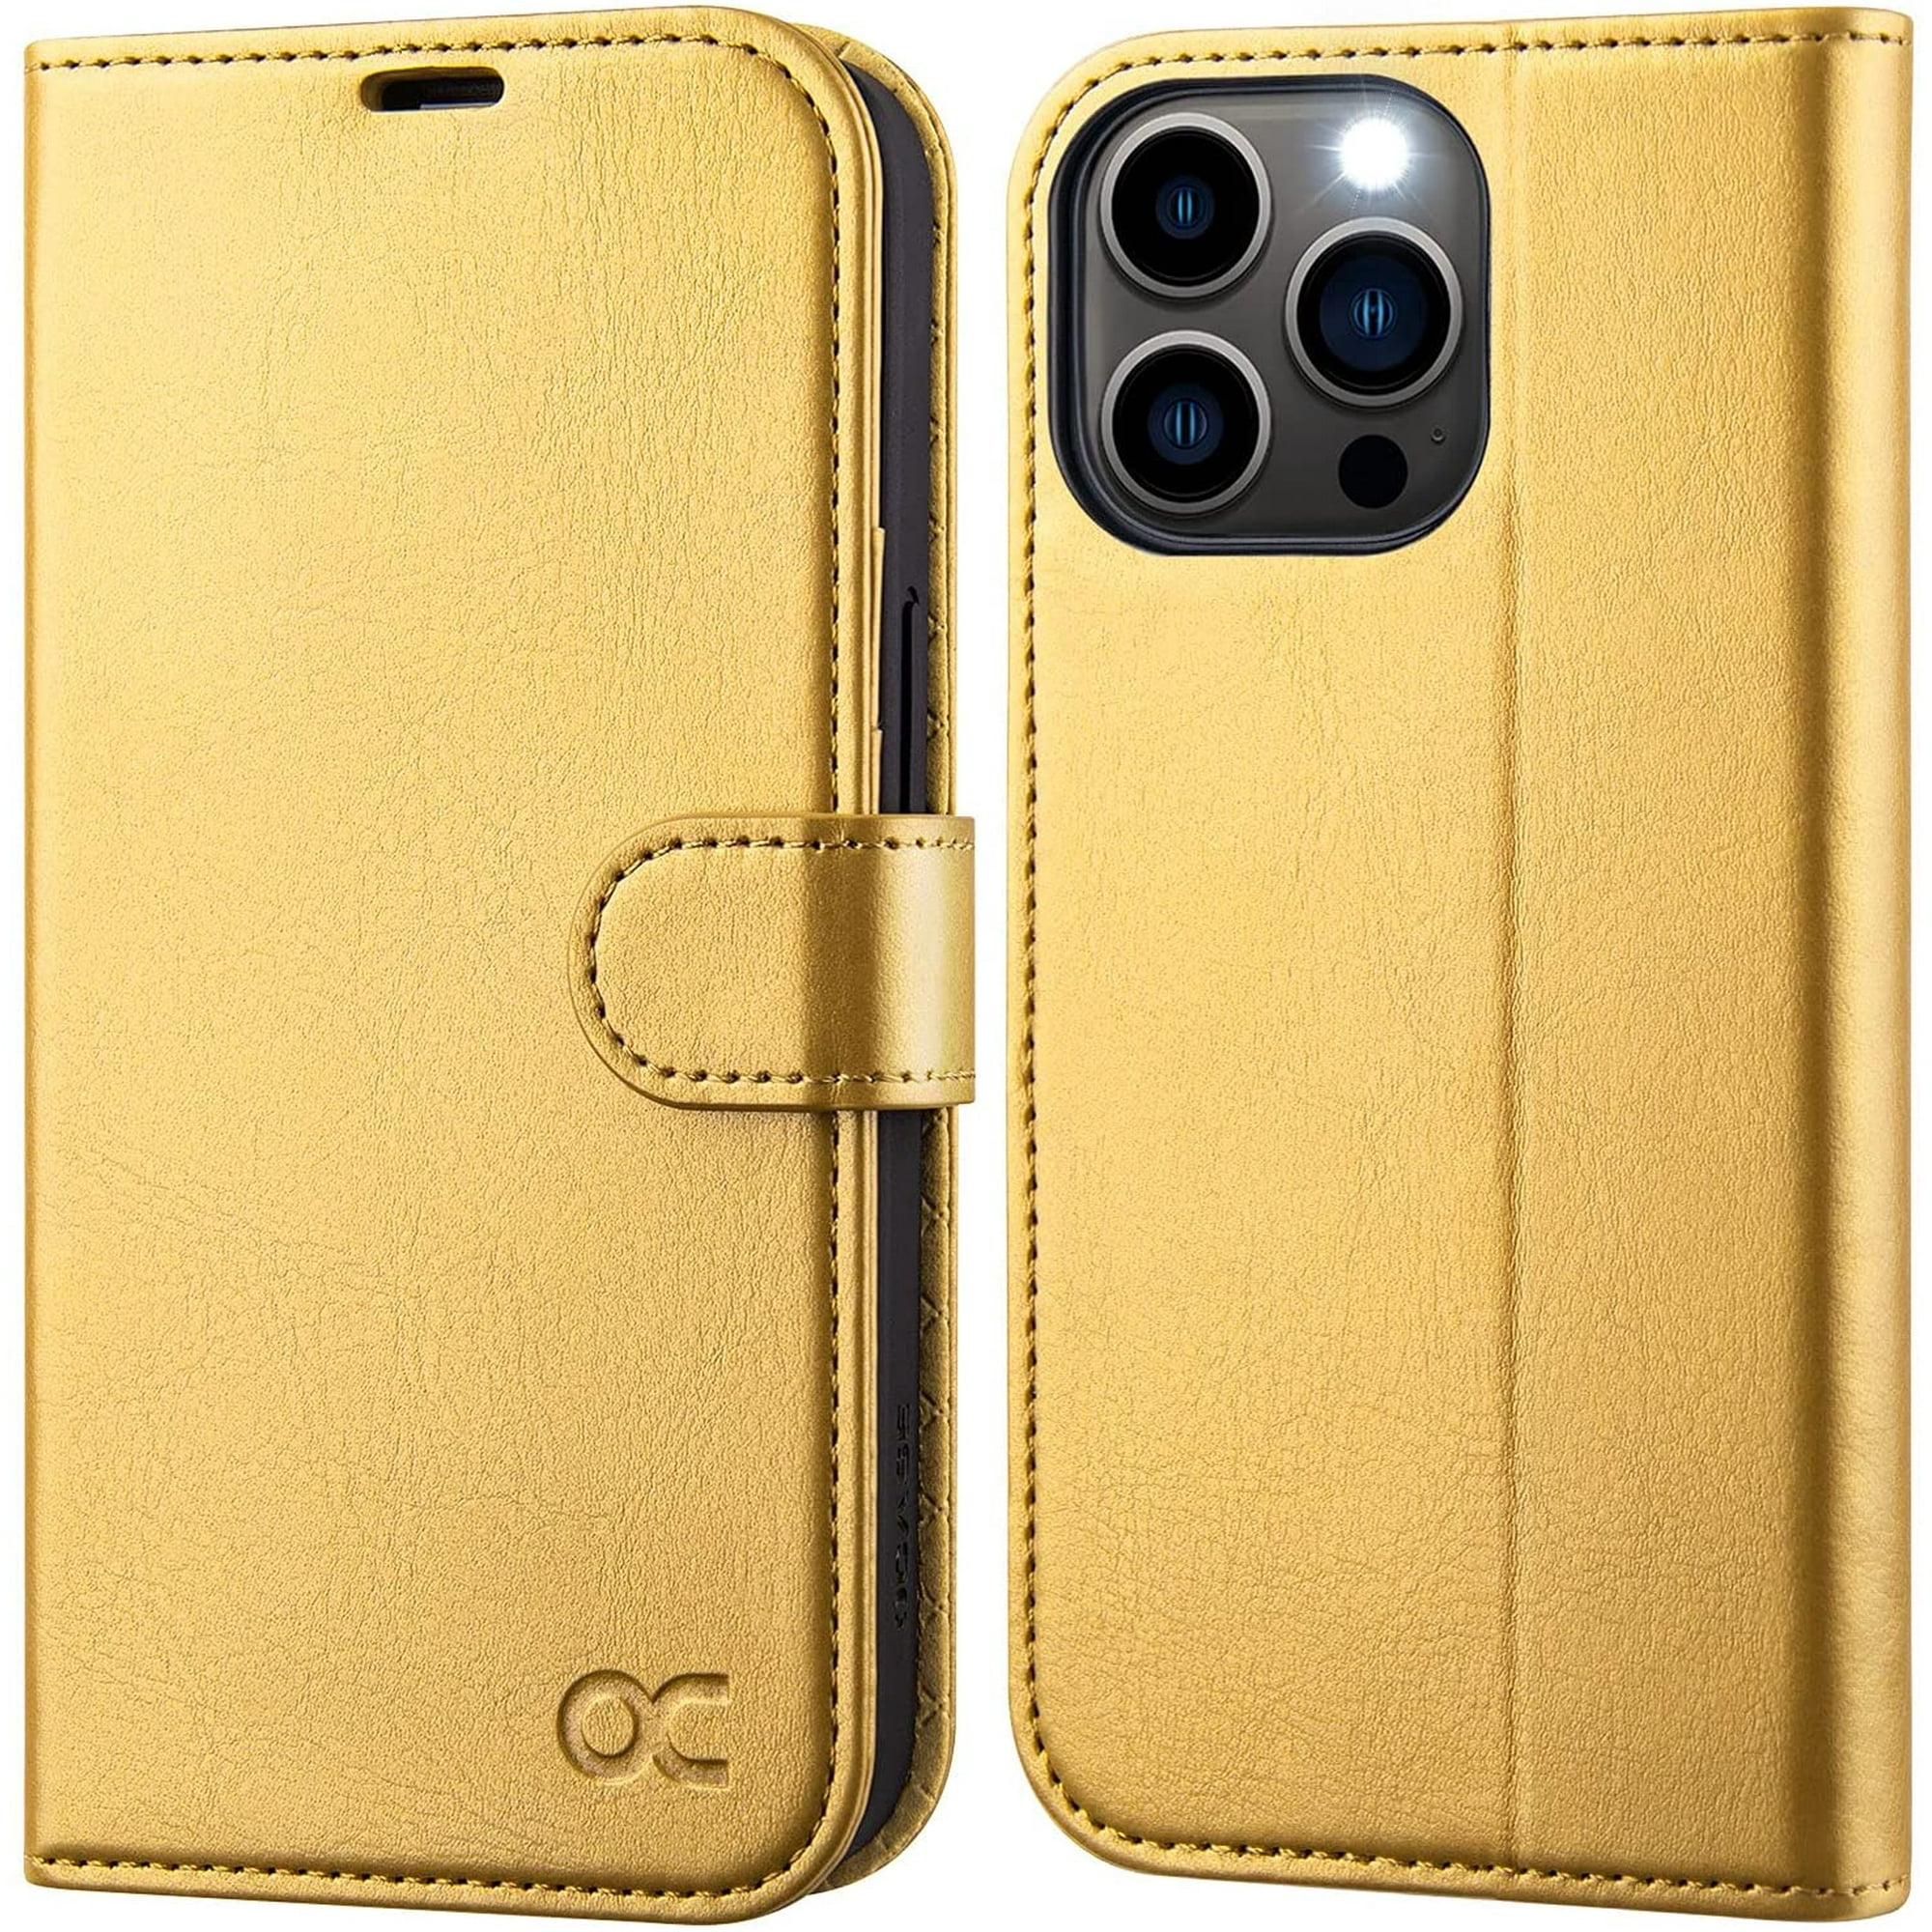 Iphone 13 Pro Max Case Pu Leather Iphone 13 Pro Max 5g Wallet Case Card Holder Kickstand Tpu Inner Shell Rfid Blocking Flip Phone Cover Compatible For 6 7 Inch Iphone 13 Pro Max Golden Sunset